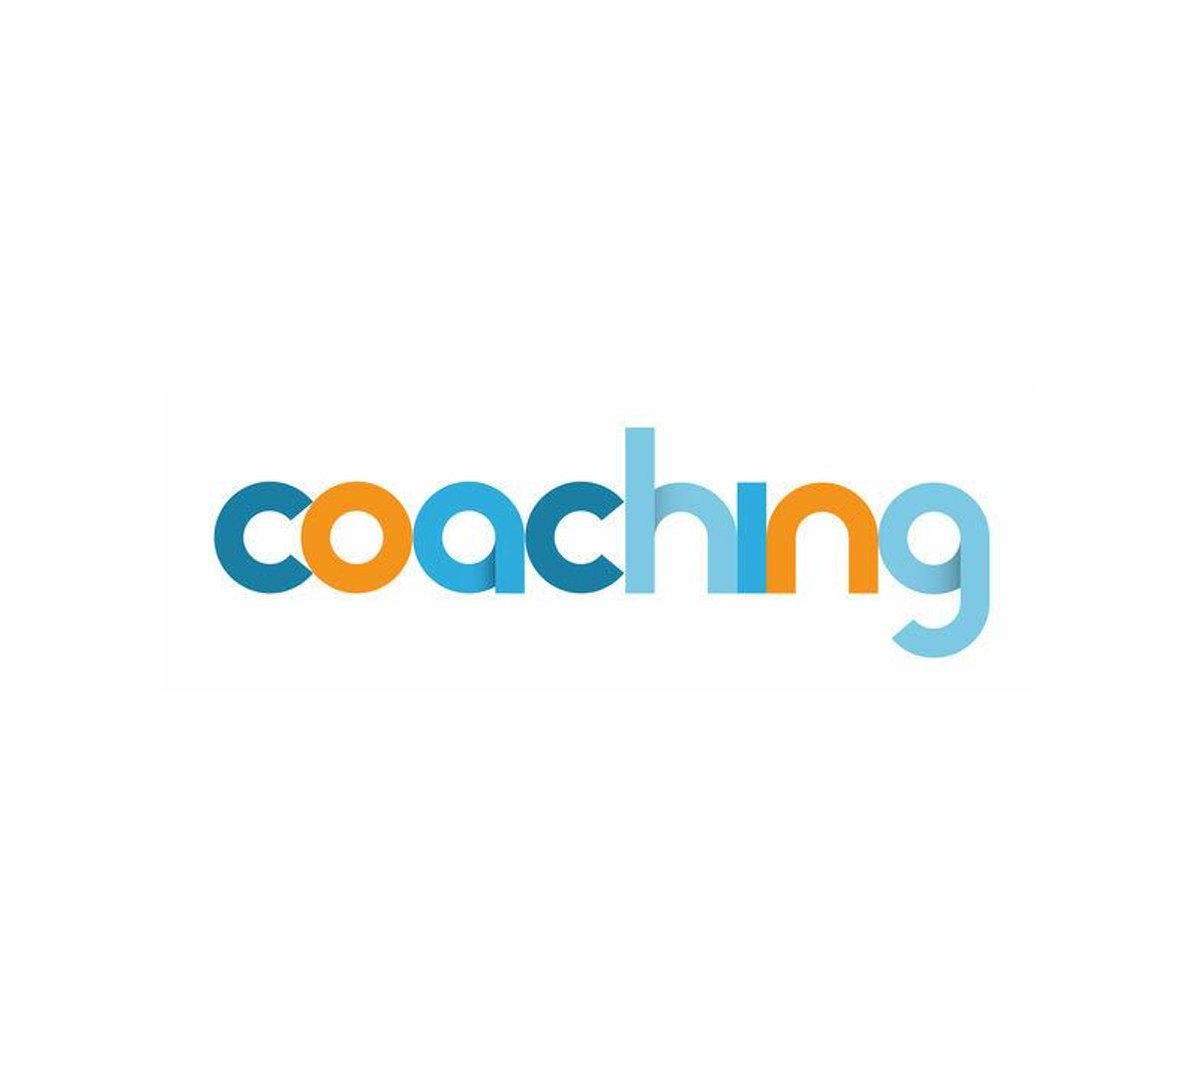 Me and a team of seven other executive coaches from @FMLM_UK Coaching Network will be speed coaching clinicians in Manchester at #FMLMConf24 Sign up now on the app or at the @FMLM_UK stand. See you there. #CoachingClinicians #Coaching #Leadership